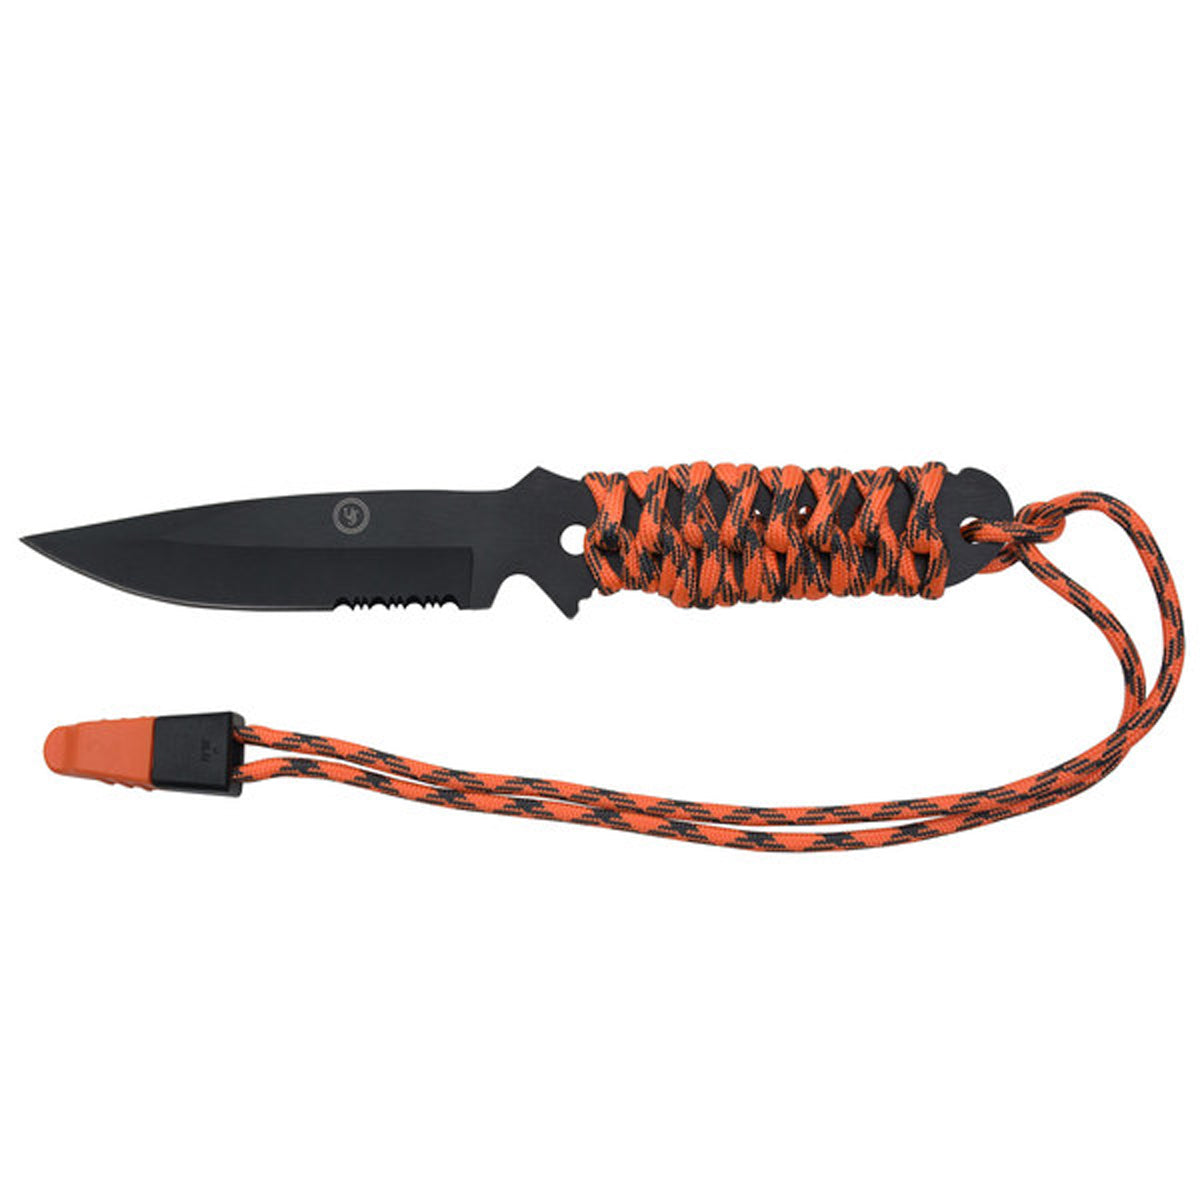 Schraf 4 Serrated Paring Knife with TPRgrip Handle